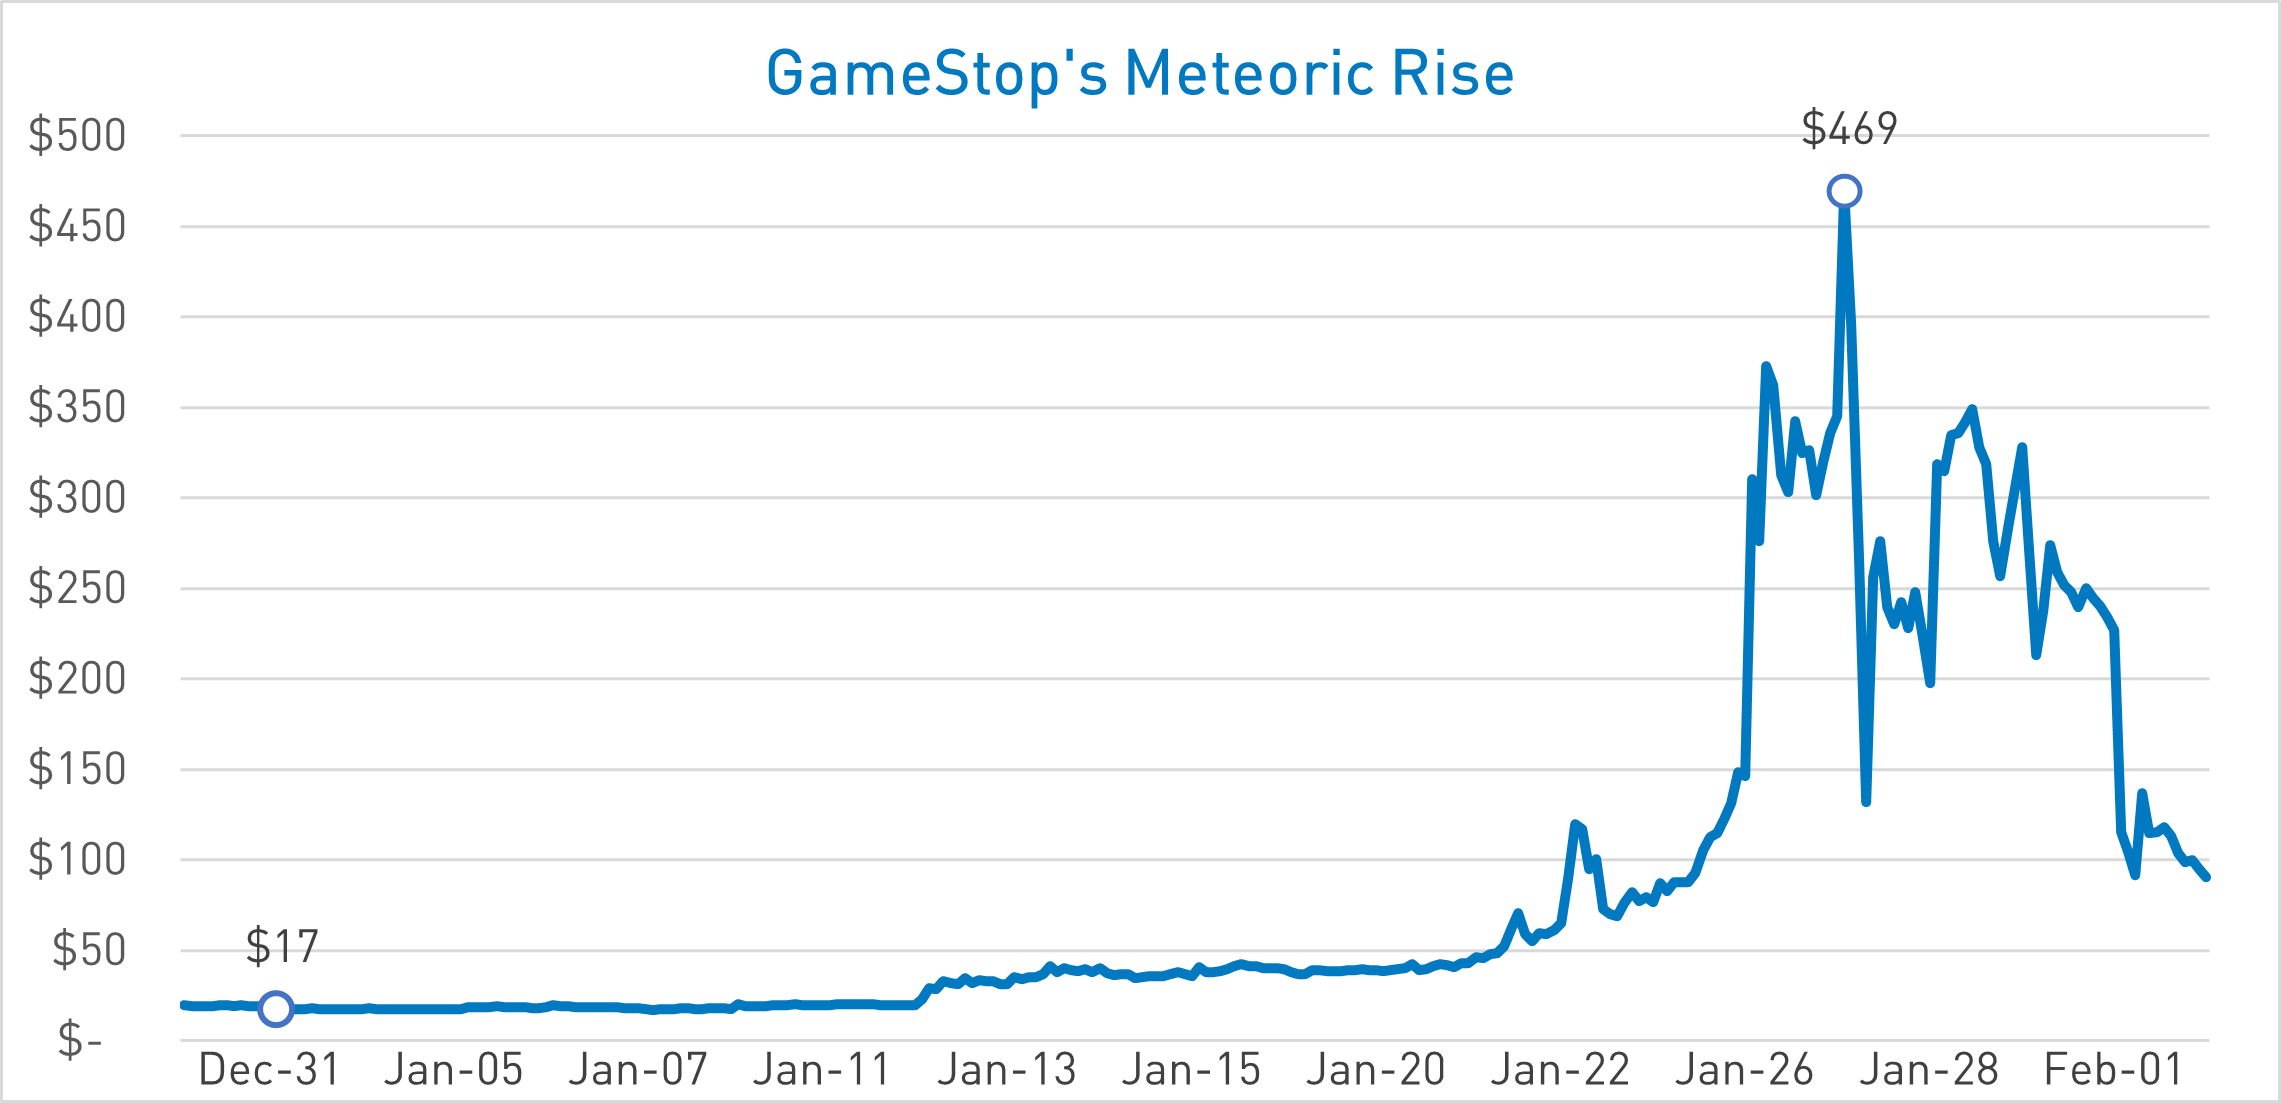 GameStop stock price graph from Dec 31 2020 to Feb 1 2021